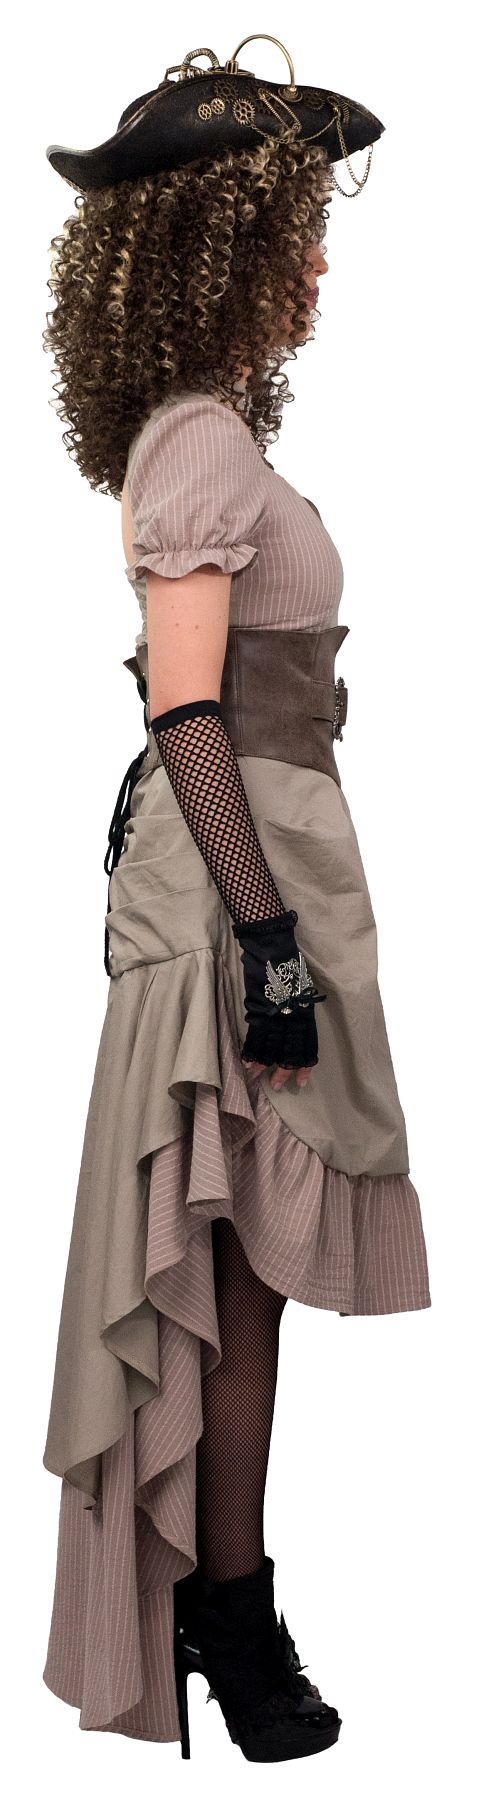 Steampunk dress mullet, taupe